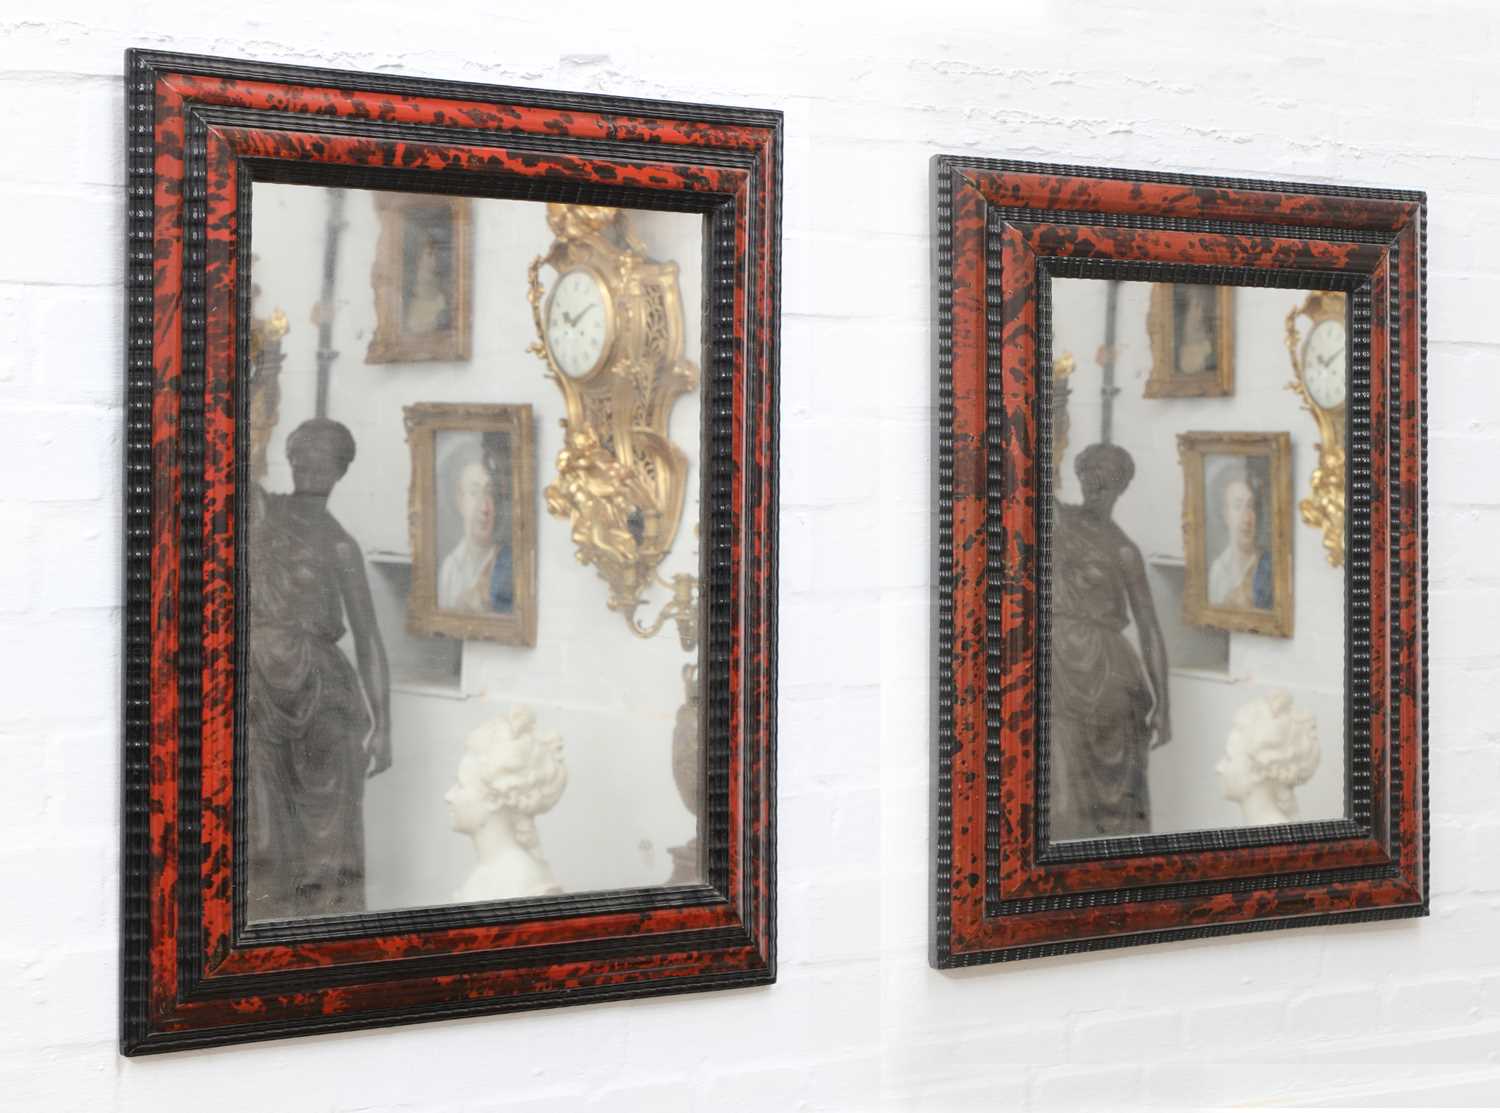 Lot 118 - Two similar red tortoiseshell and ebonised wall mirrors